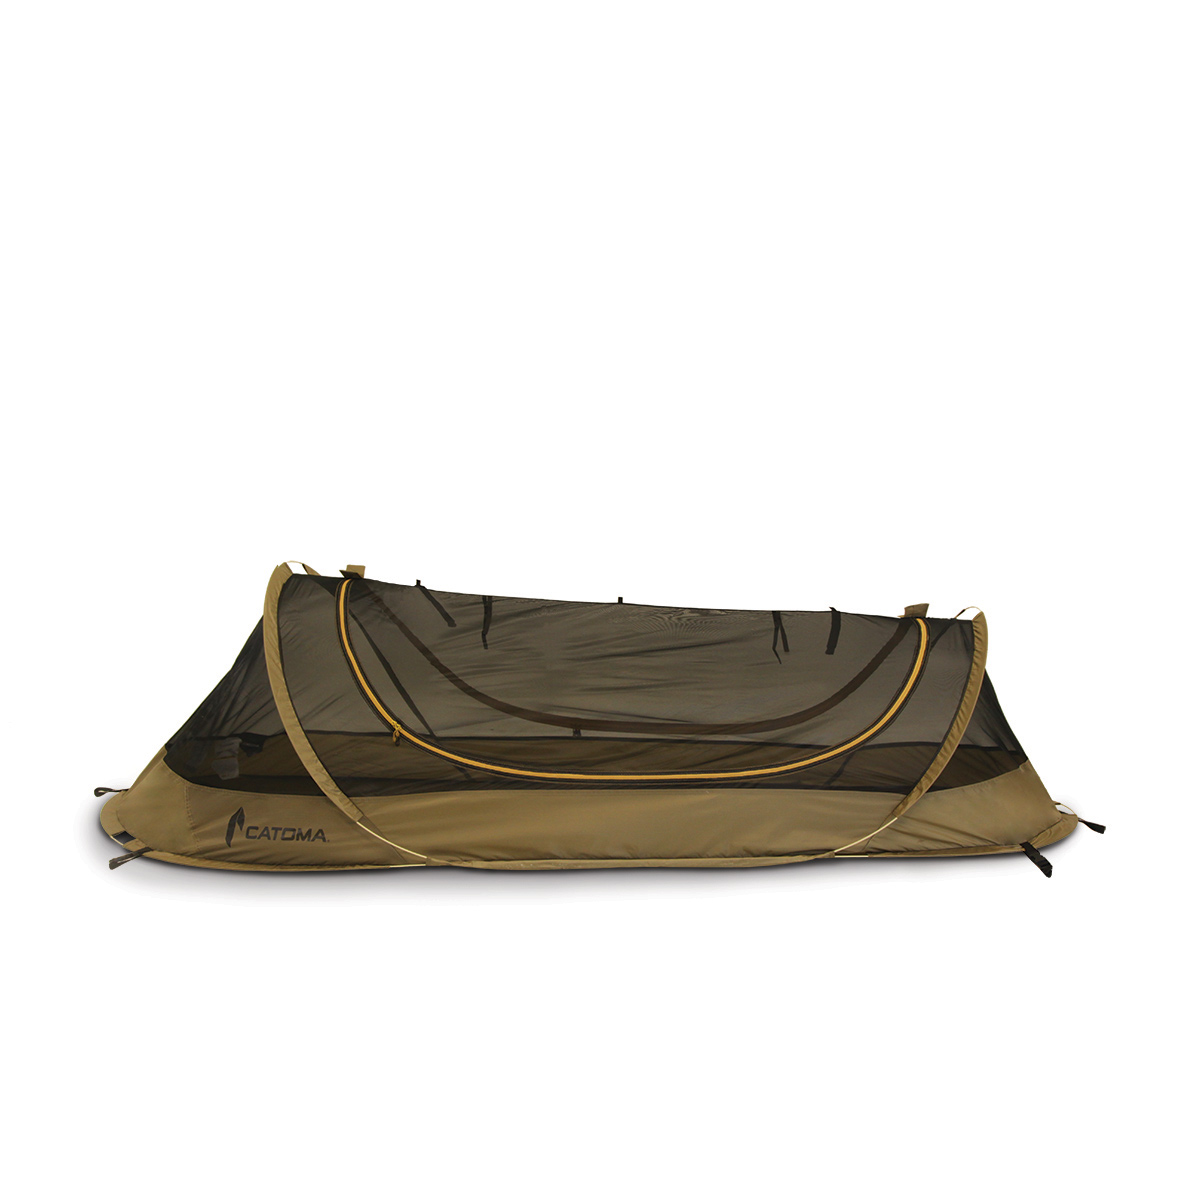 Military Tents 1 Man Shelter Coyote Brown Camping Hiking Catoma Pop Up Tent 